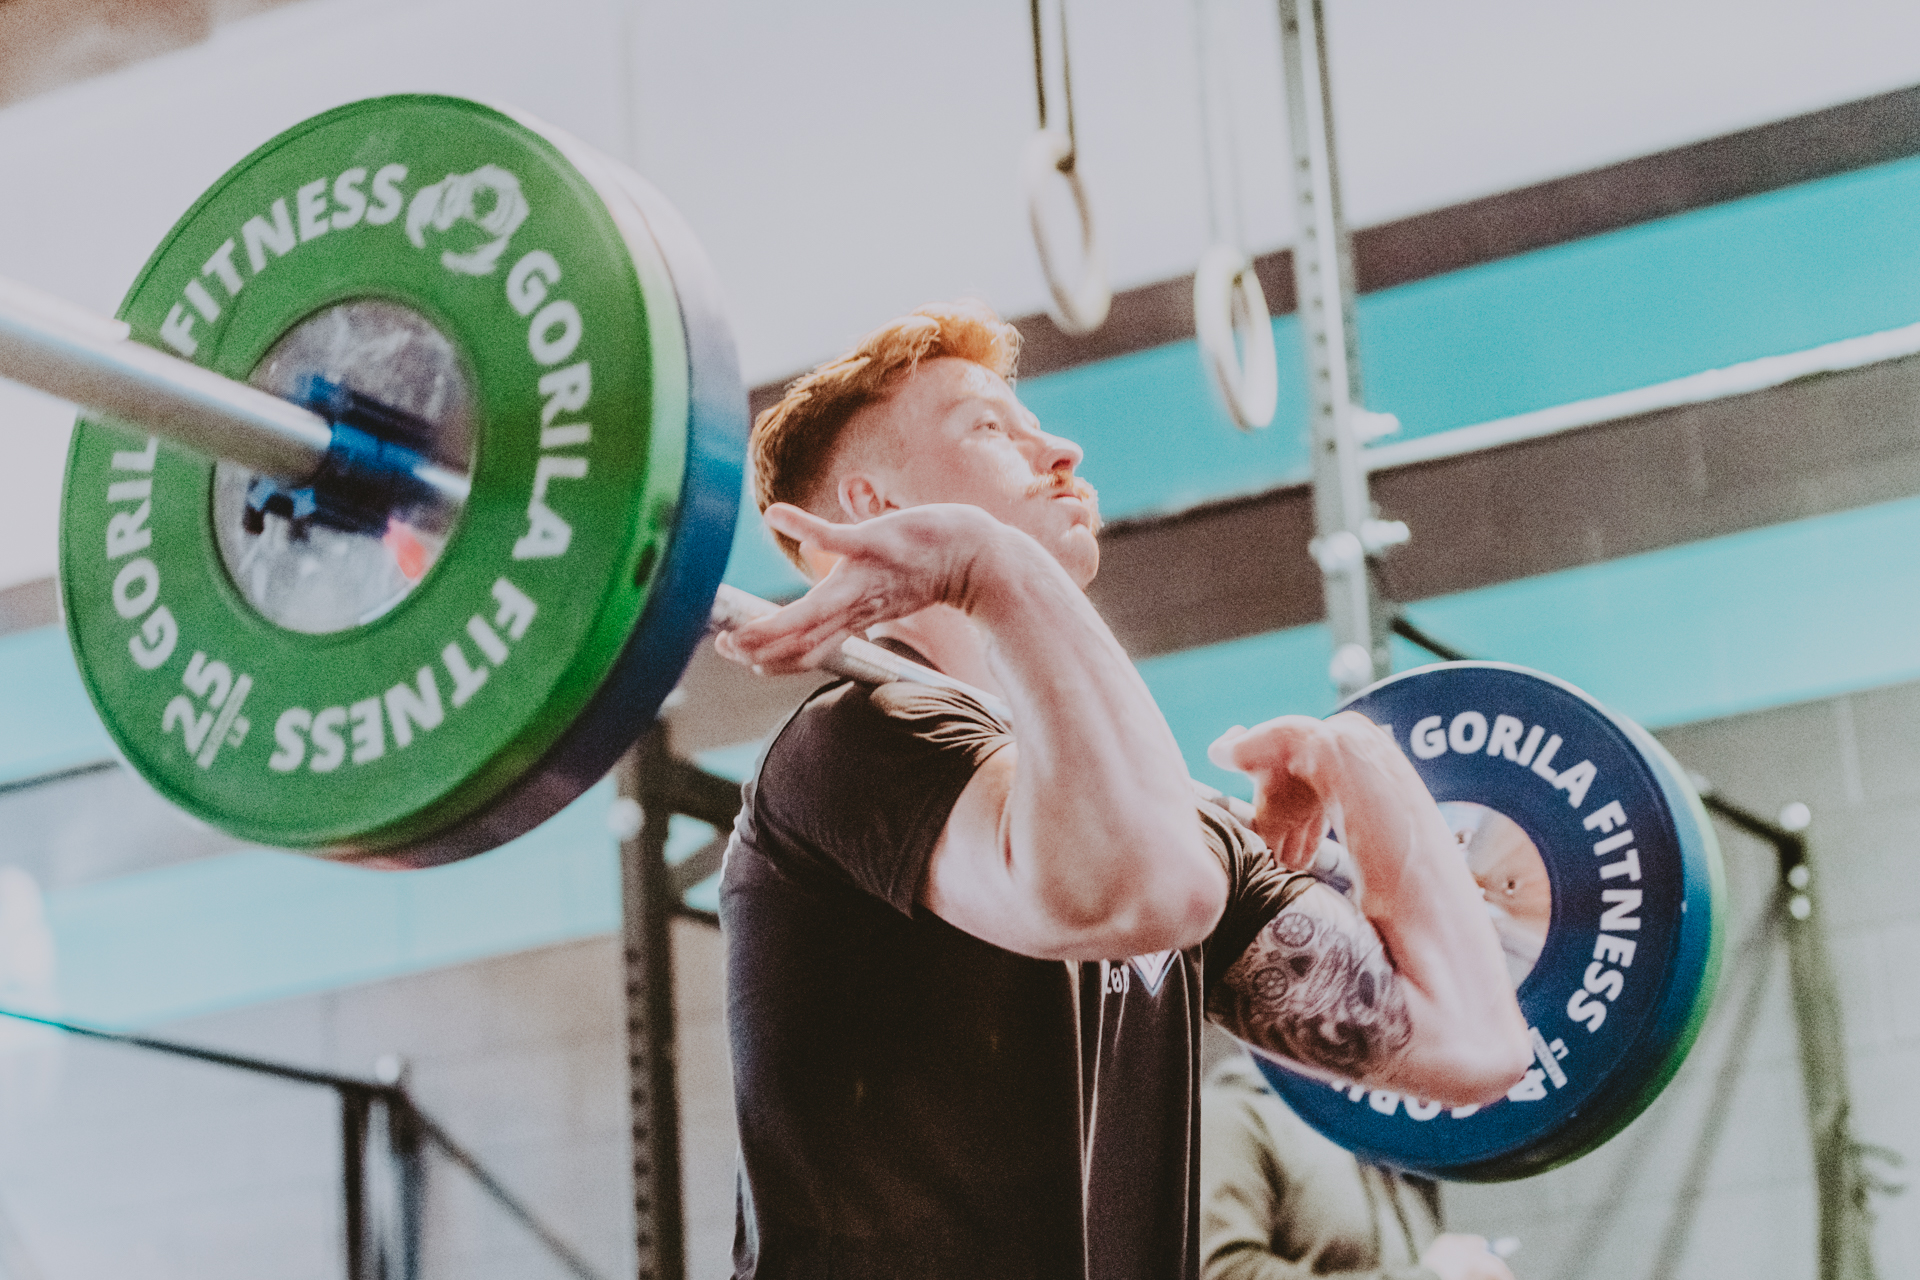 Hot red head guy doing cleans -Victoria BC Crossfit Gym 